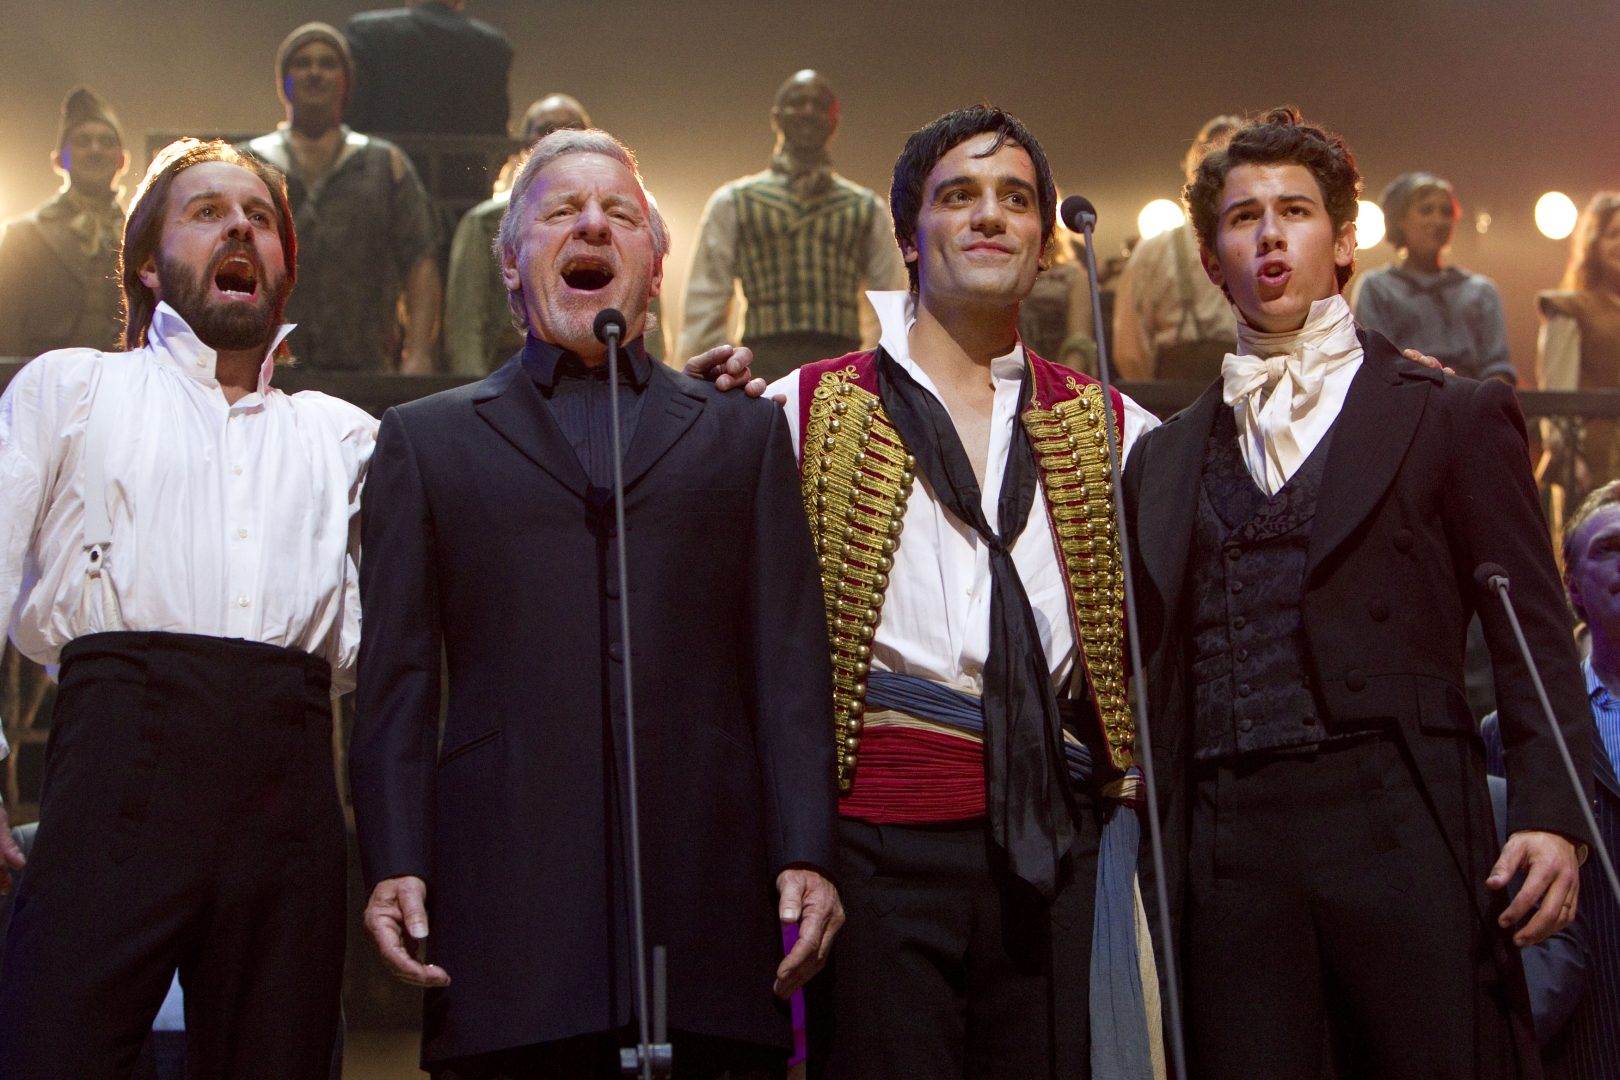 Alfie Boe (Jean Valjean), Colm Wilkinson (Jean Valjean), Ramin Karimloo (Enjolras) and Nick Jonas (Marius) during the curtain call for the Les Miserables 25th Anniversary Concert at The O2 Arena, London, England on the 3rd October 2010. (Credit should read: Dan Wooller/wooller.com). Paid use only. No Syndication